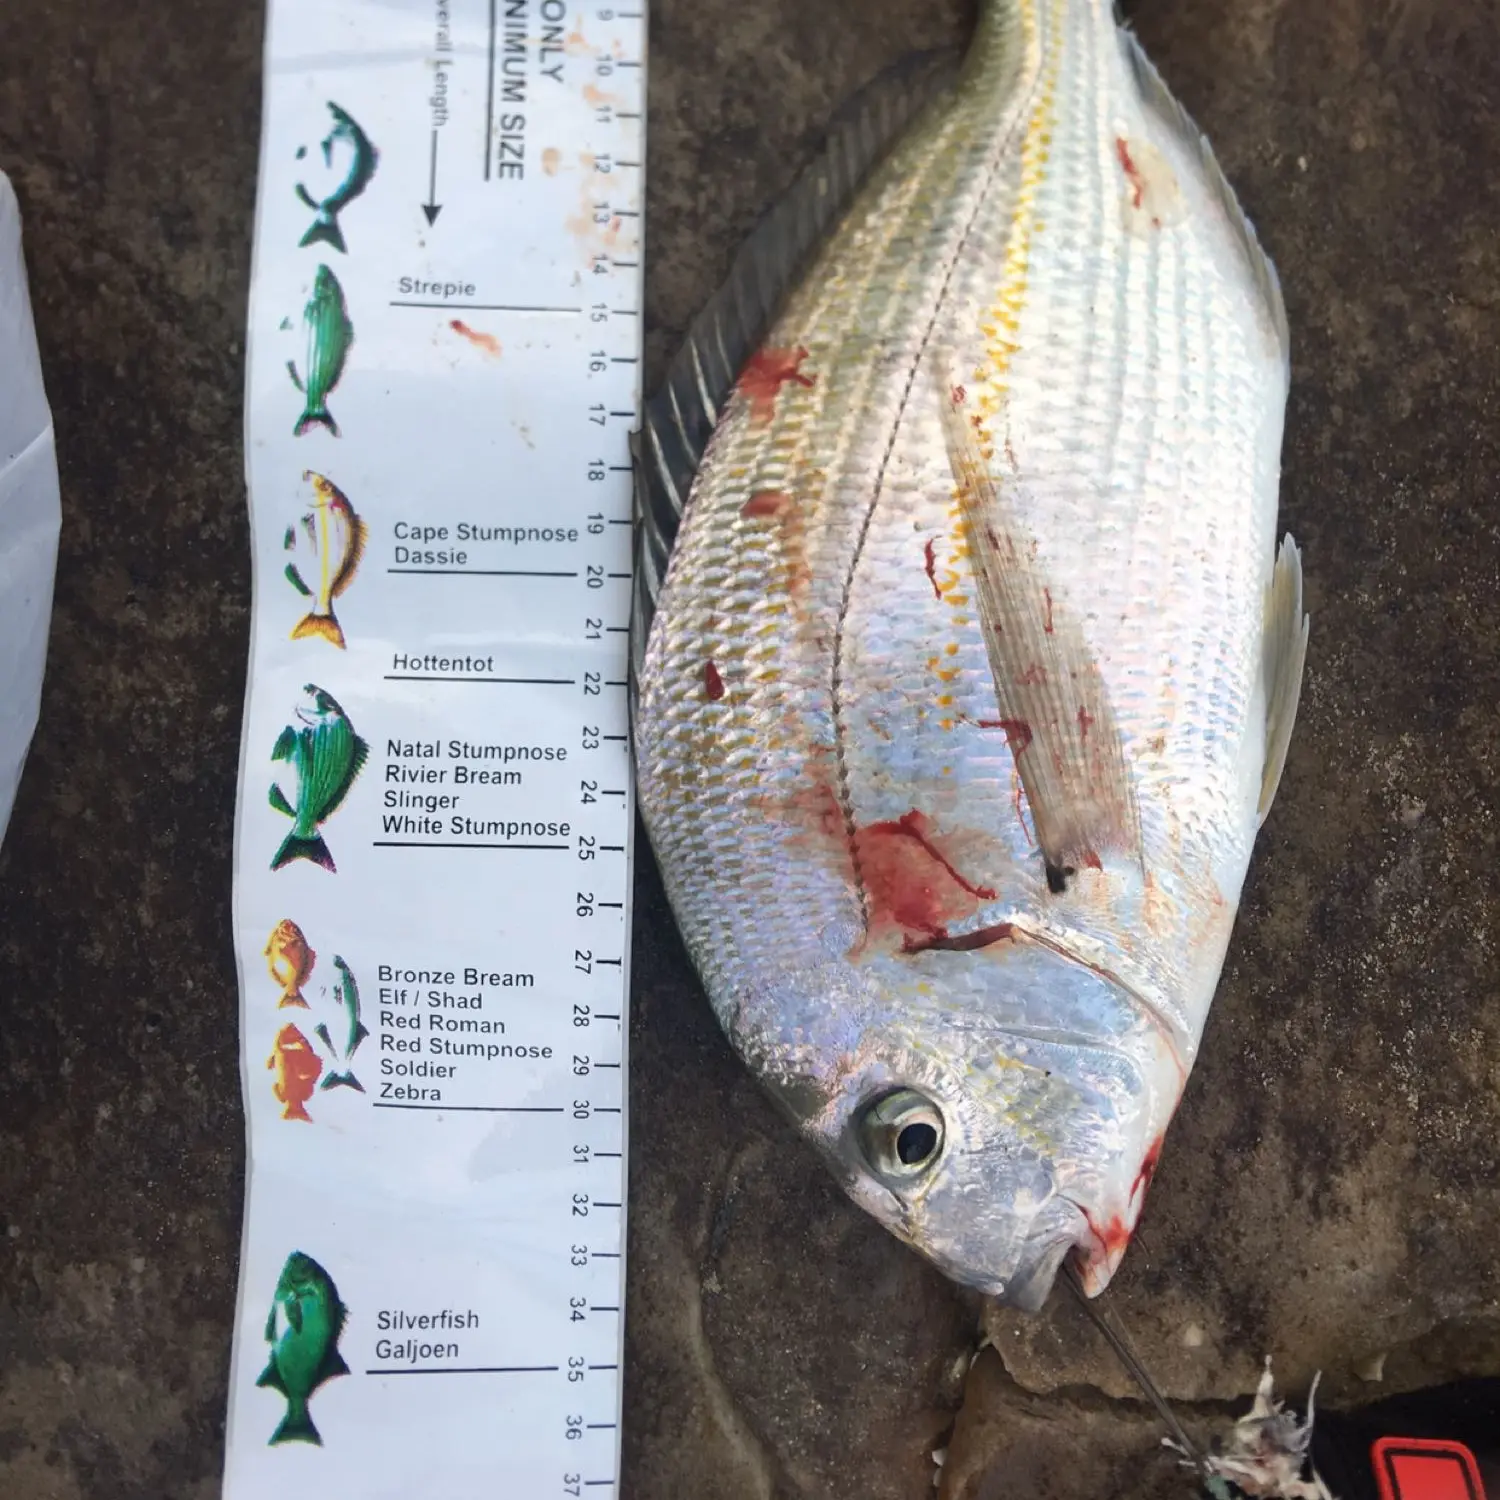 ᐅ Piesangrivier fishing reports🎣• Western Cape, South Africa fishing